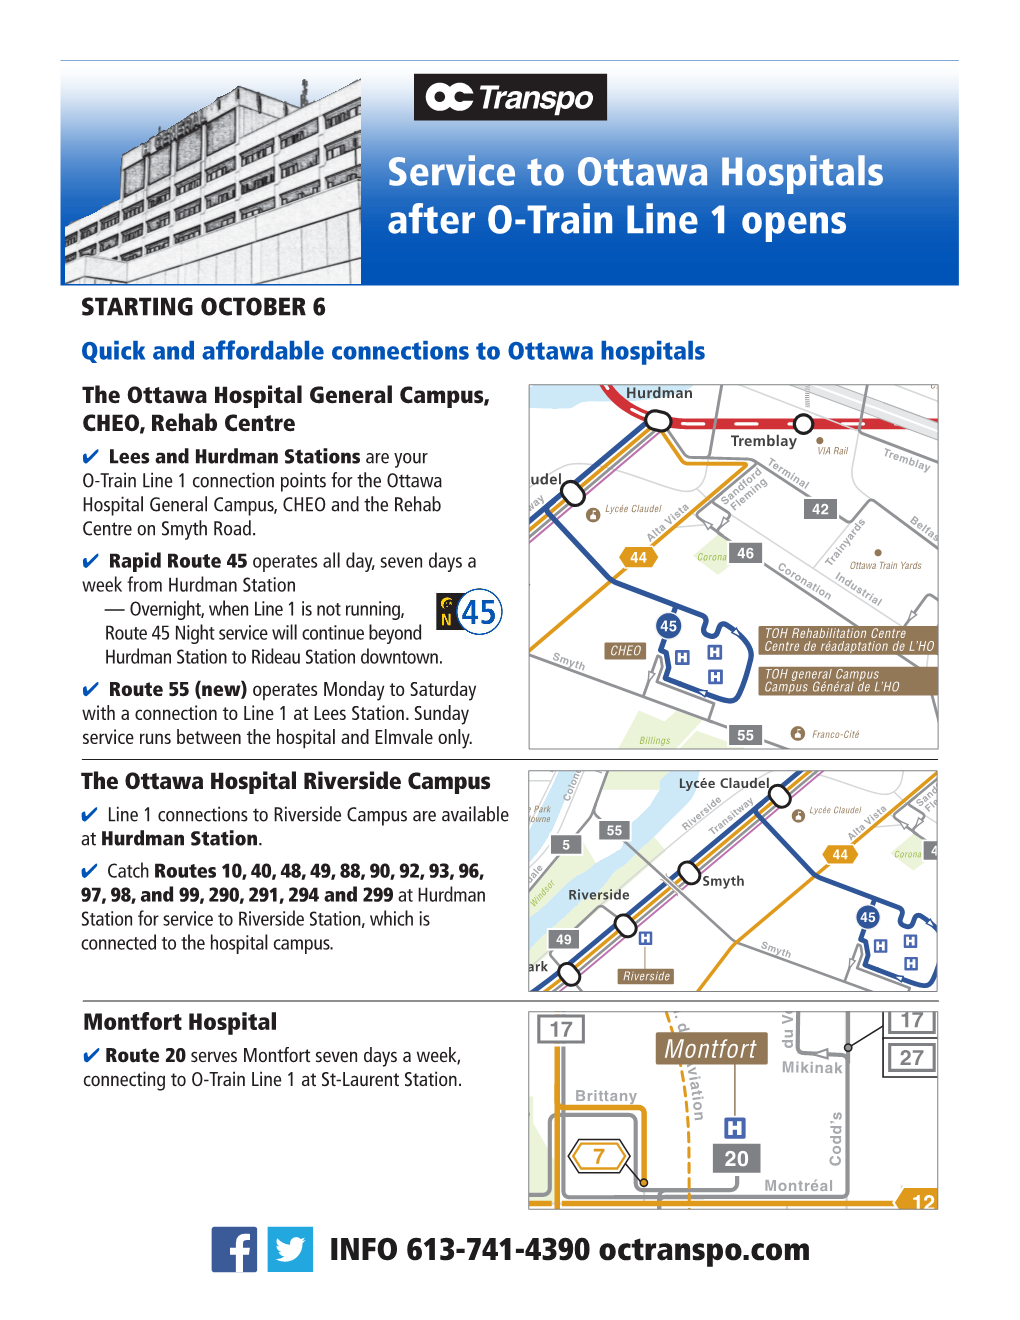 Service to Ottawa Hospitals After O-Train Line 1 Opens